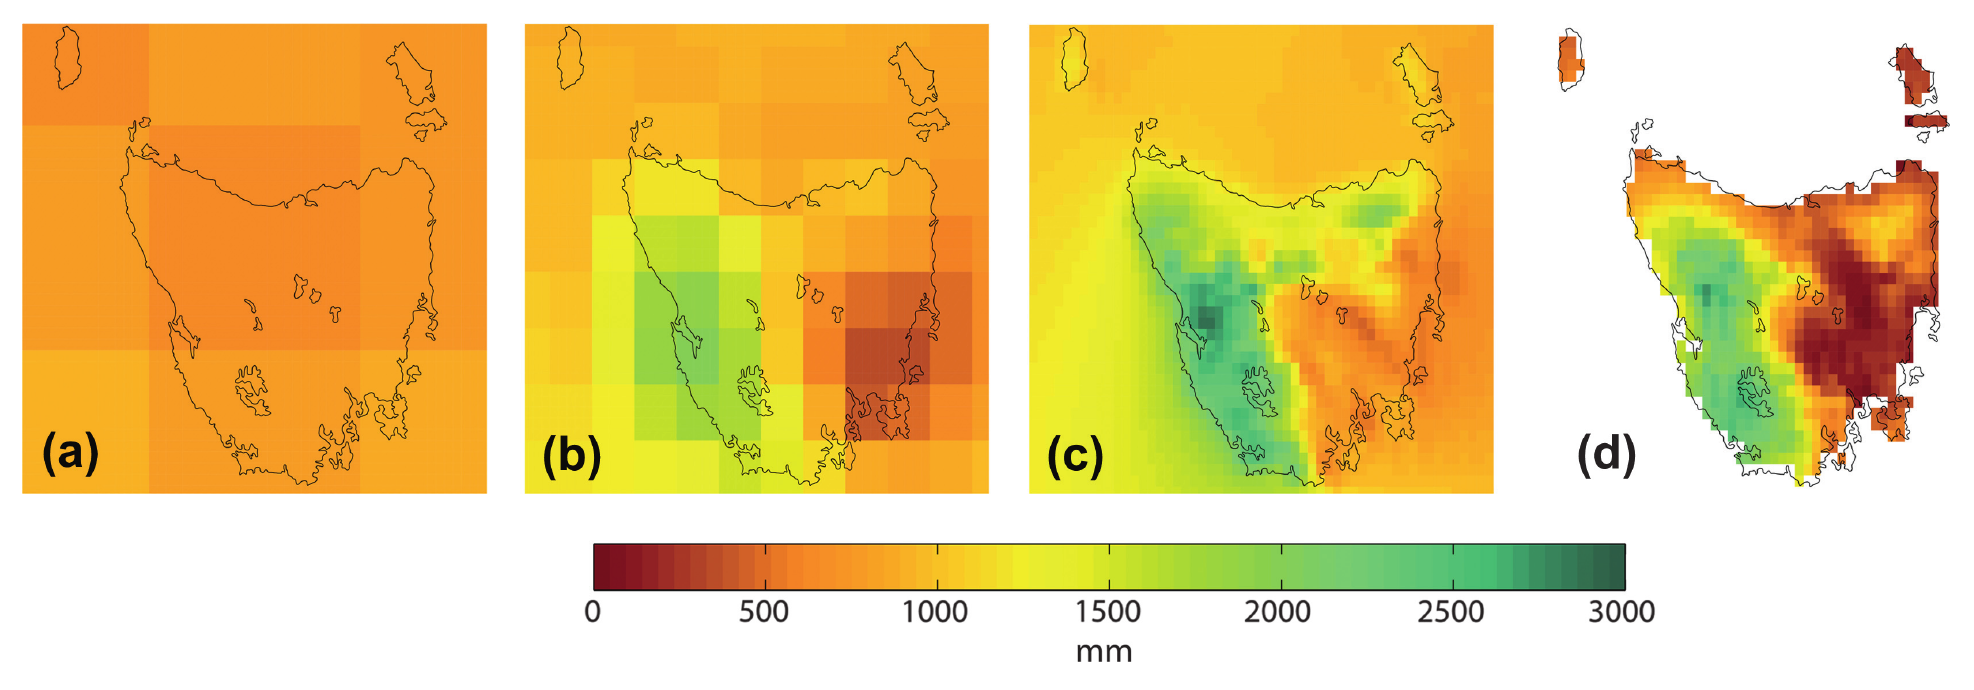 precipitation modelled at different scales